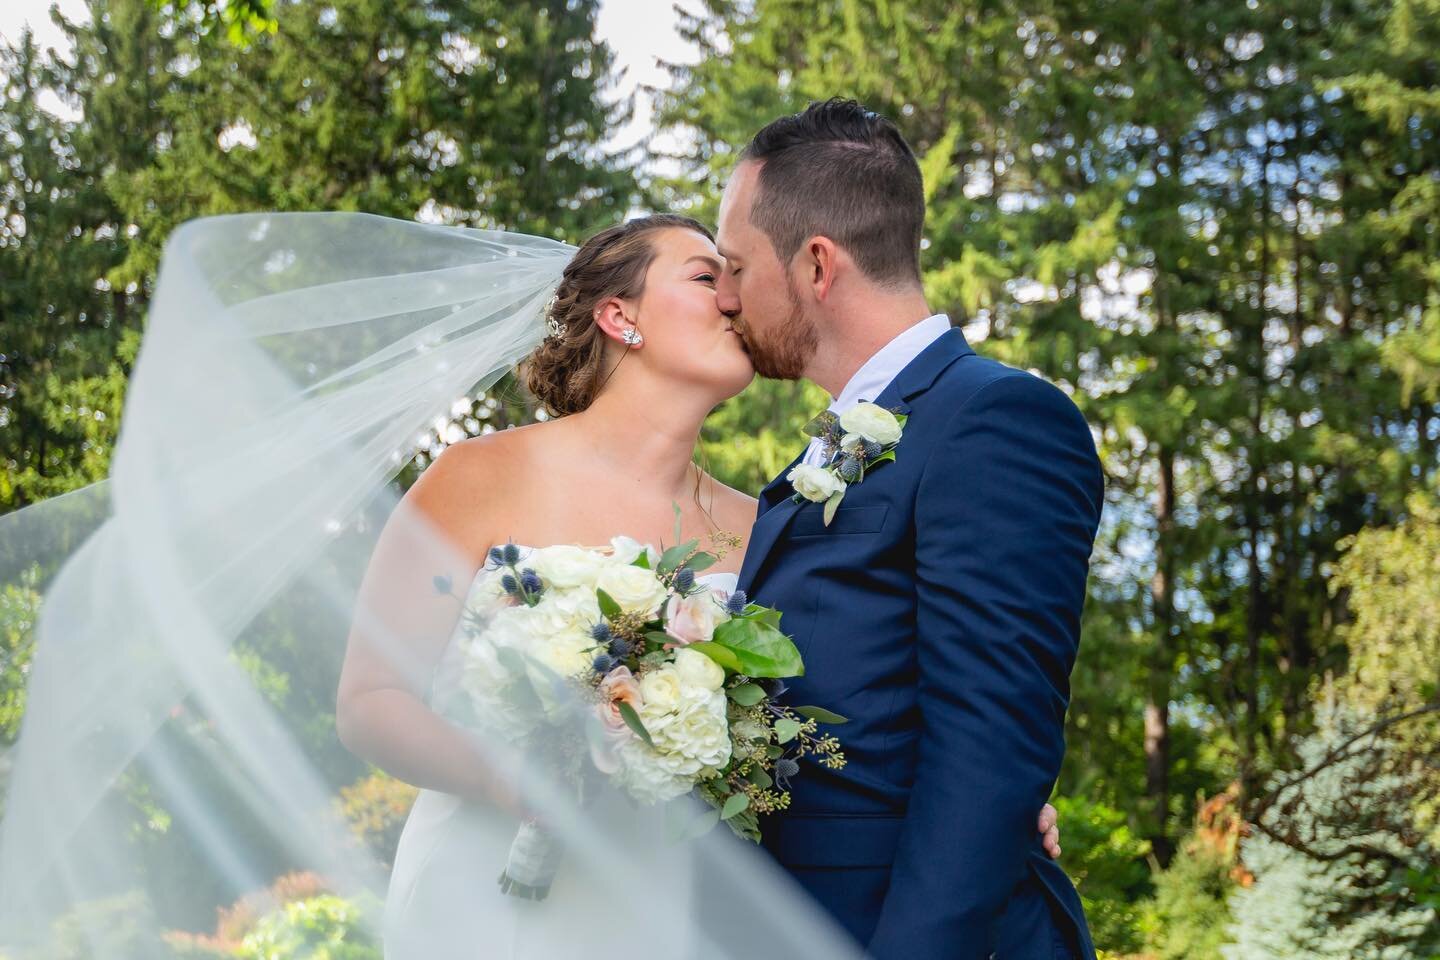 They way Nick and Hannah look at each other&hellip;🥰 It&rsquo;s the sweetest! 

#dibblesinnorchardandestate #dibblesinn #appleorchardlodge #wedding #theknot #weddingwire #cathedralveil #veil #dmvweddingphotographer #cnywedding #weddingphotography